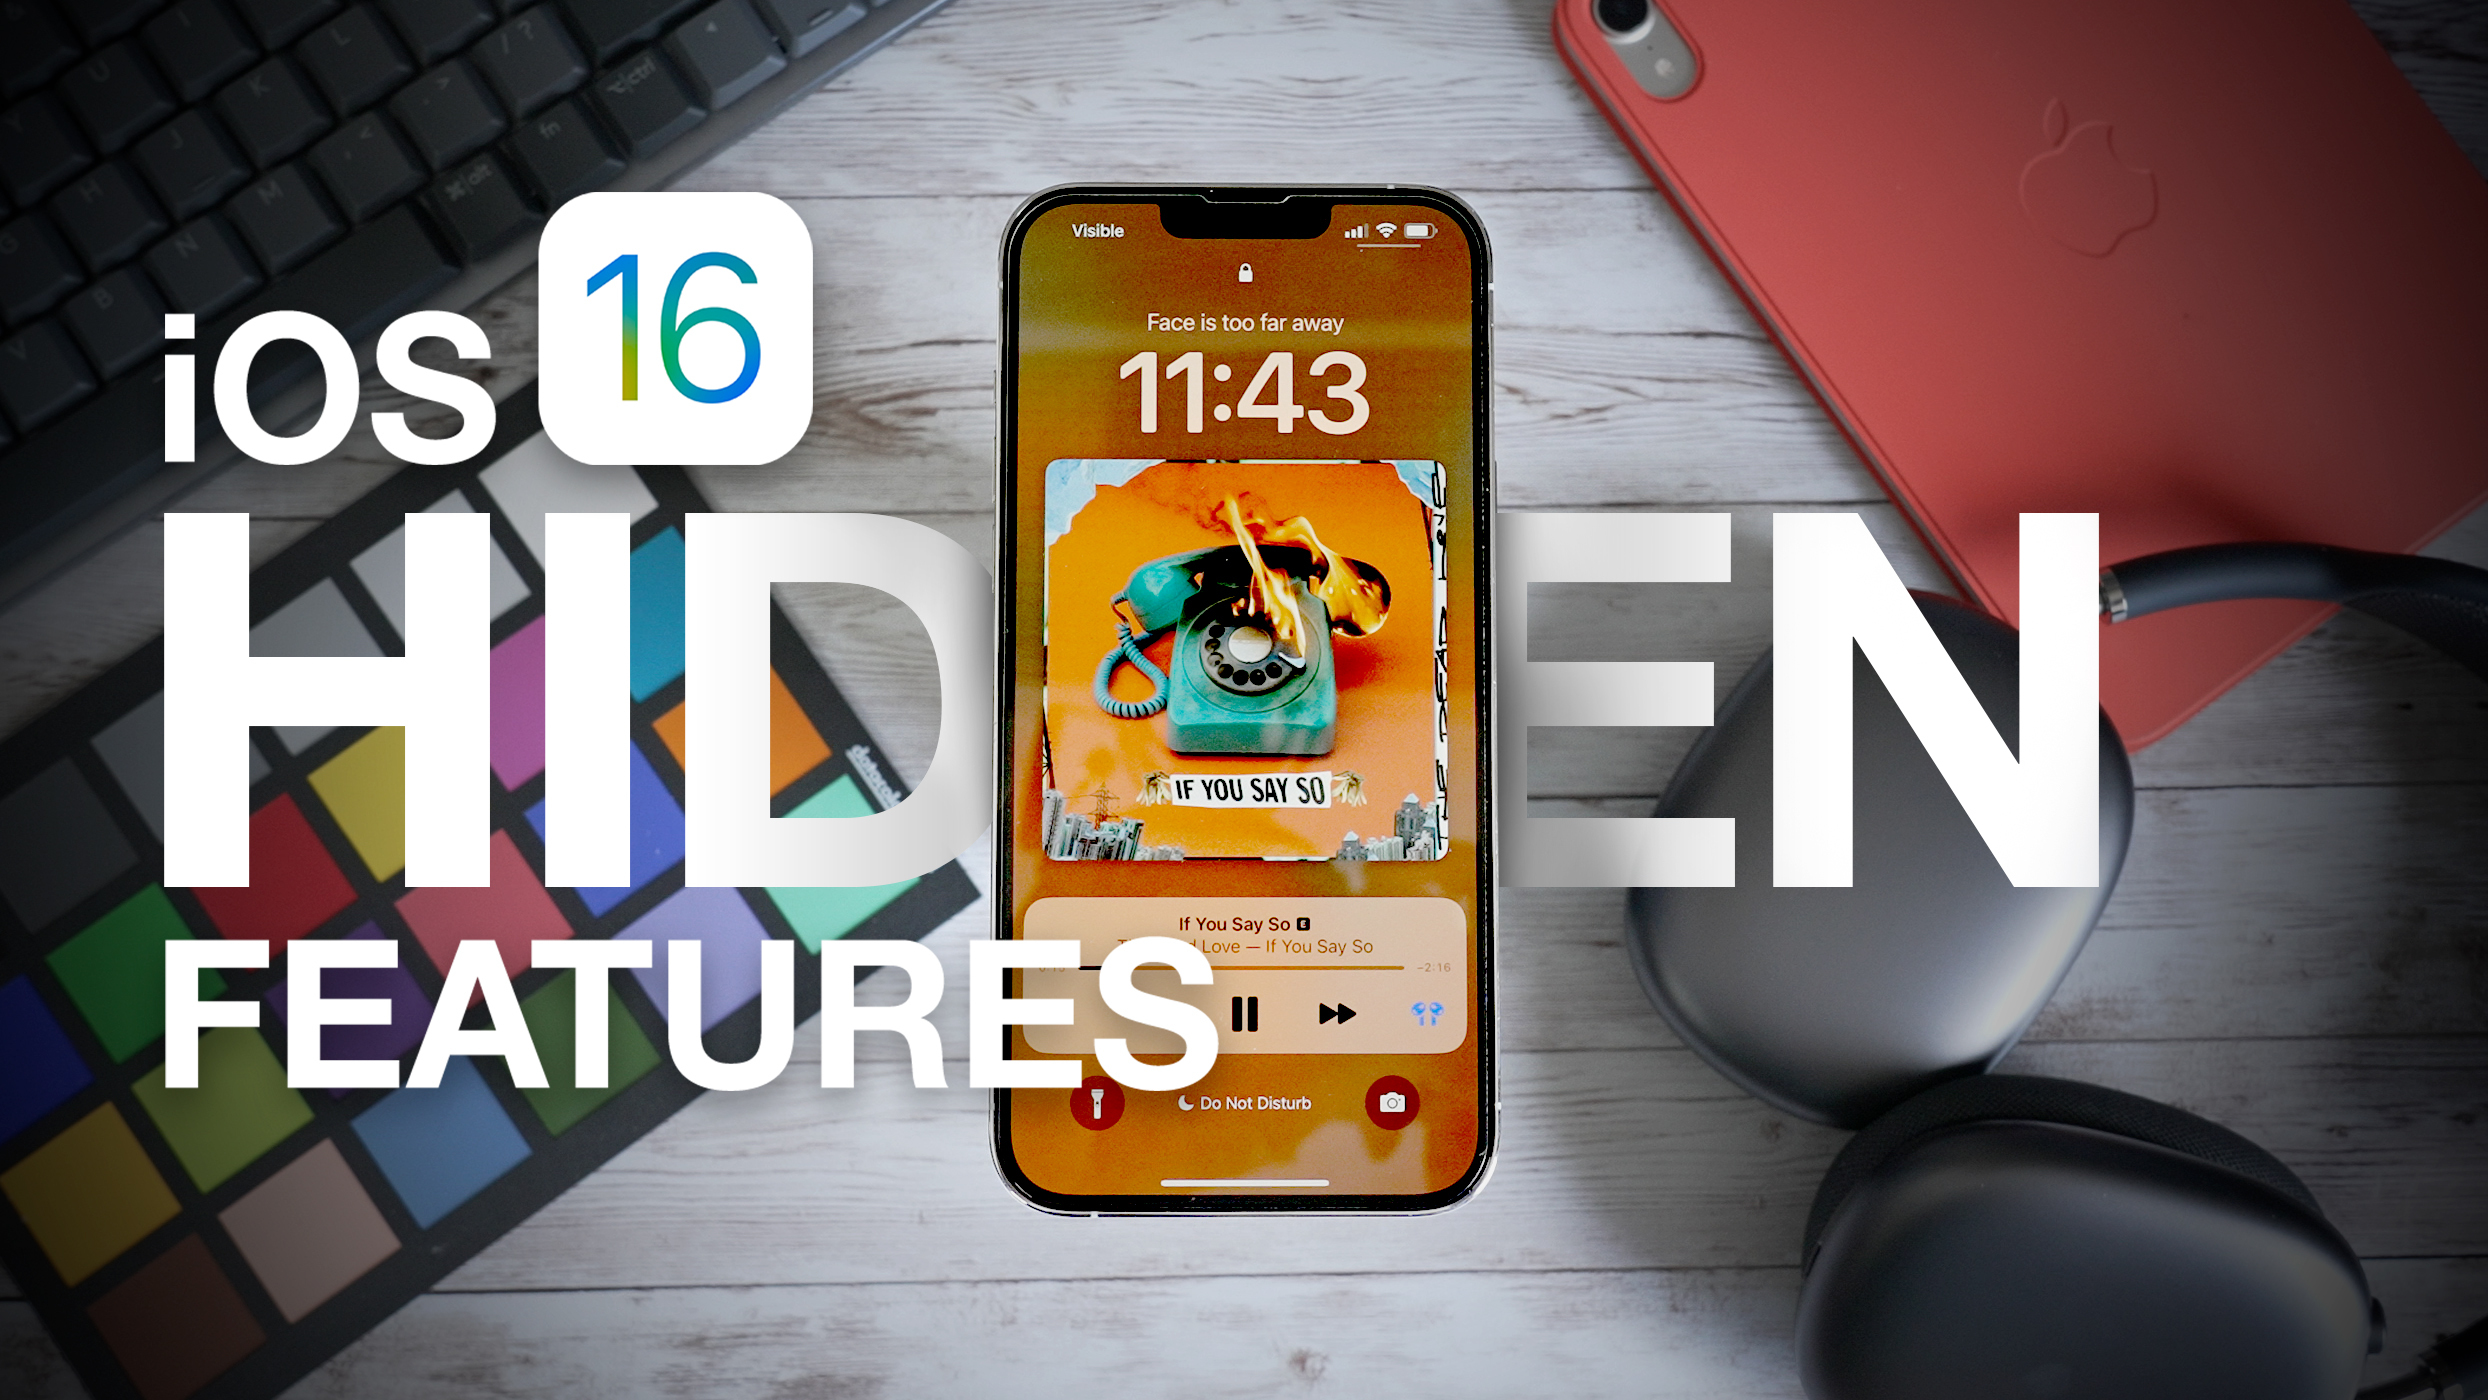 16 Hidden iOS 16 Features You Didn’t Know About